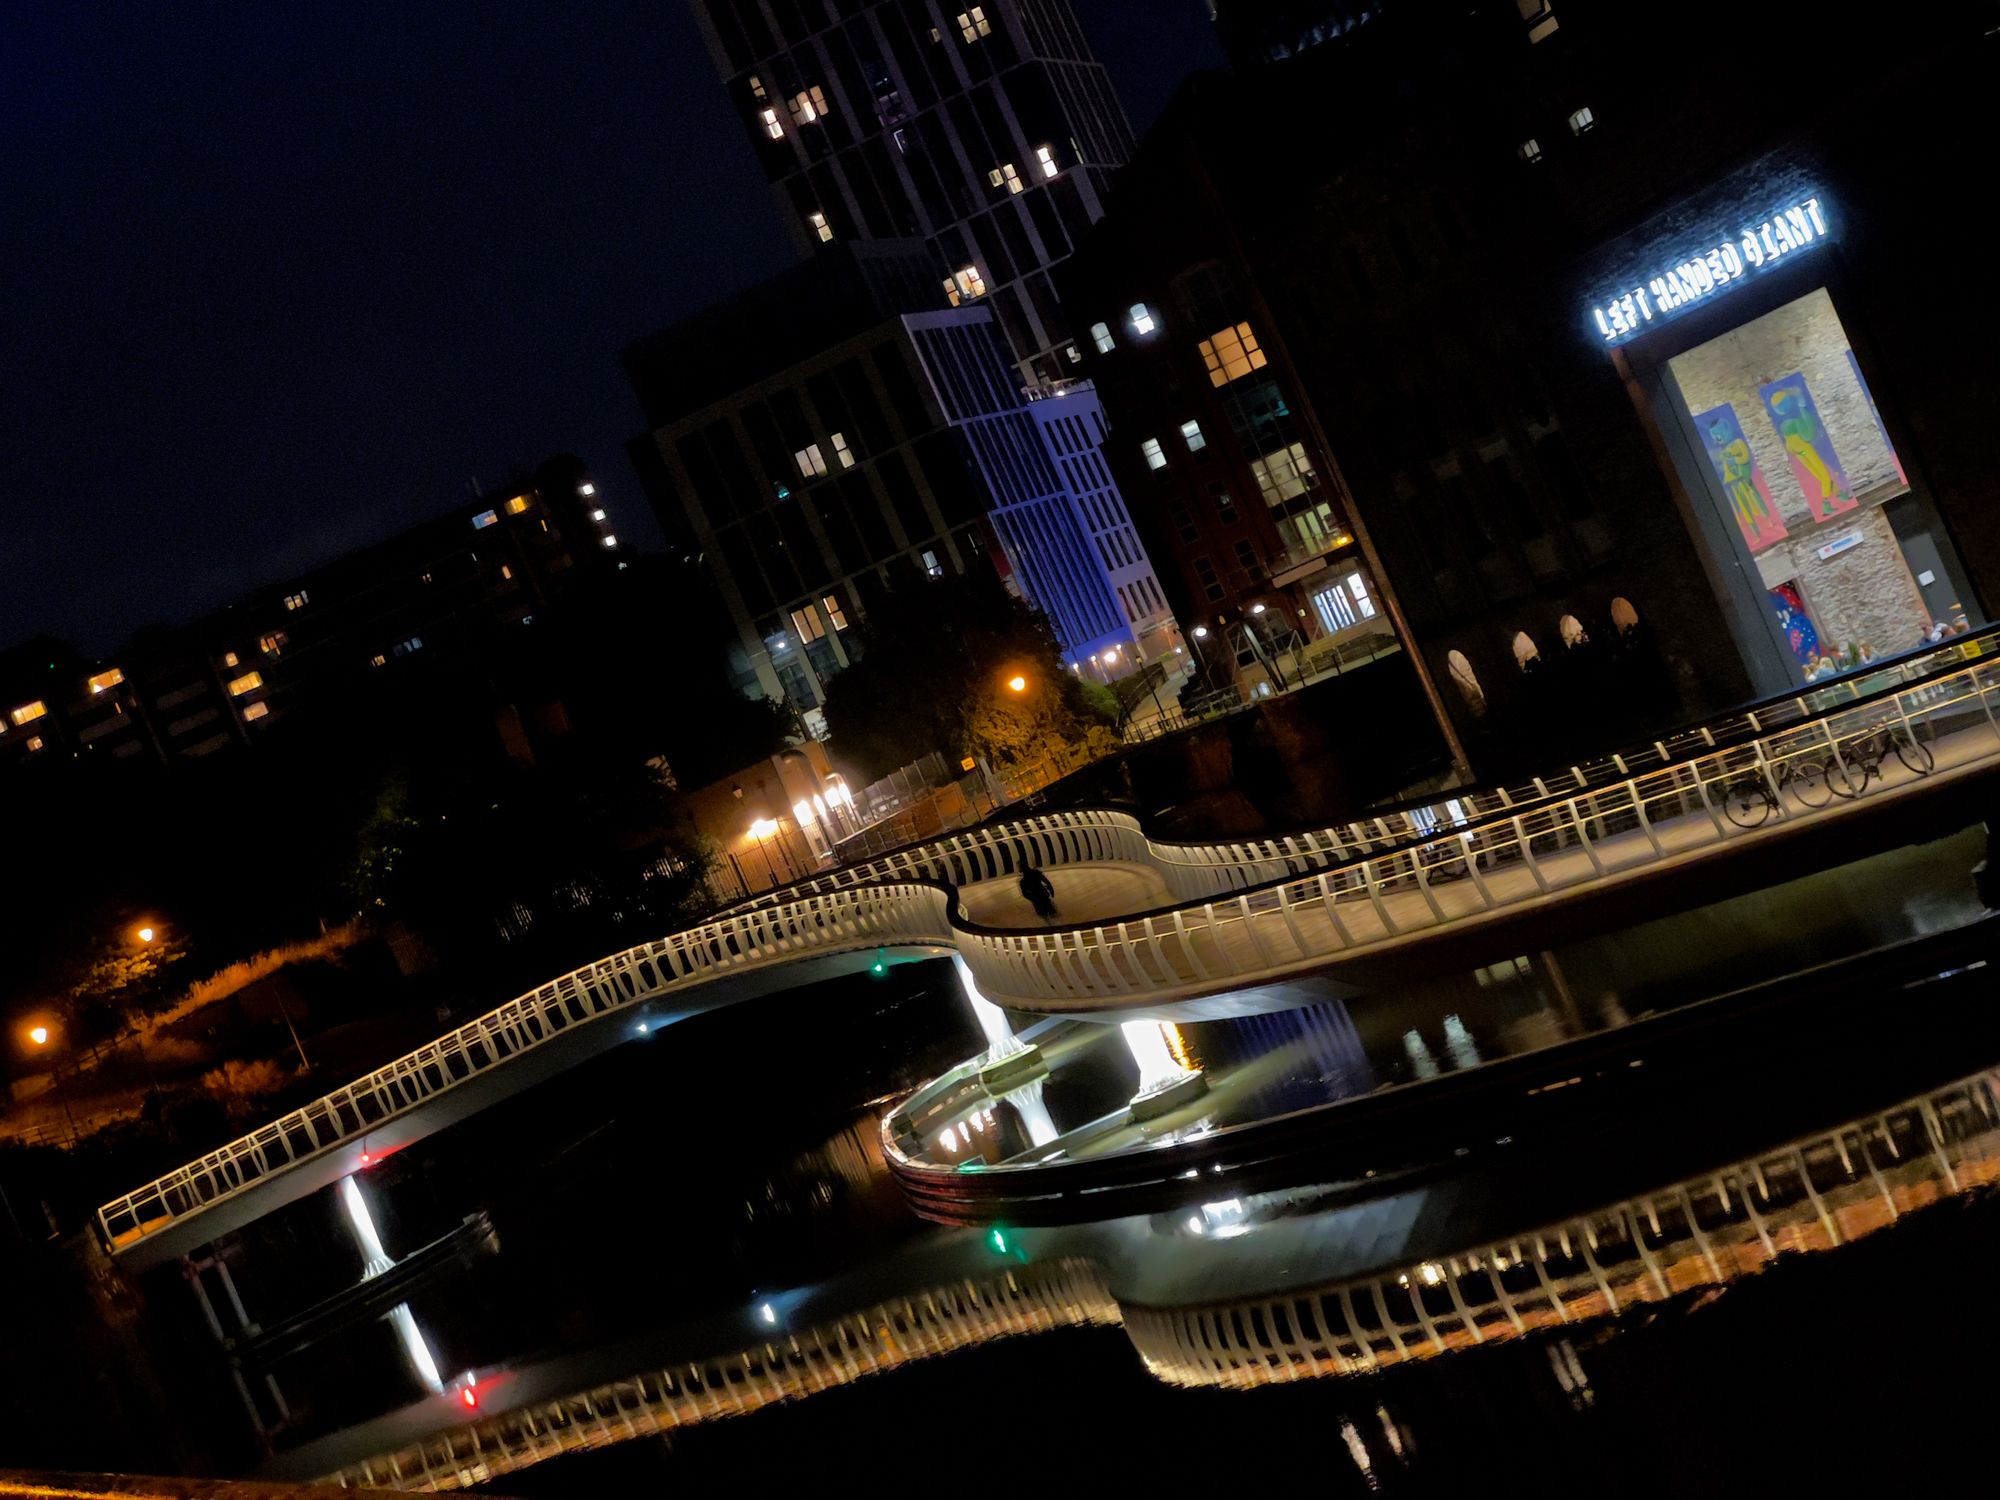 A twisty bridge over the river curves sinuously, reflected in the water. A lighted sign on the right bank reads "LEFT AHNDED GIANT."